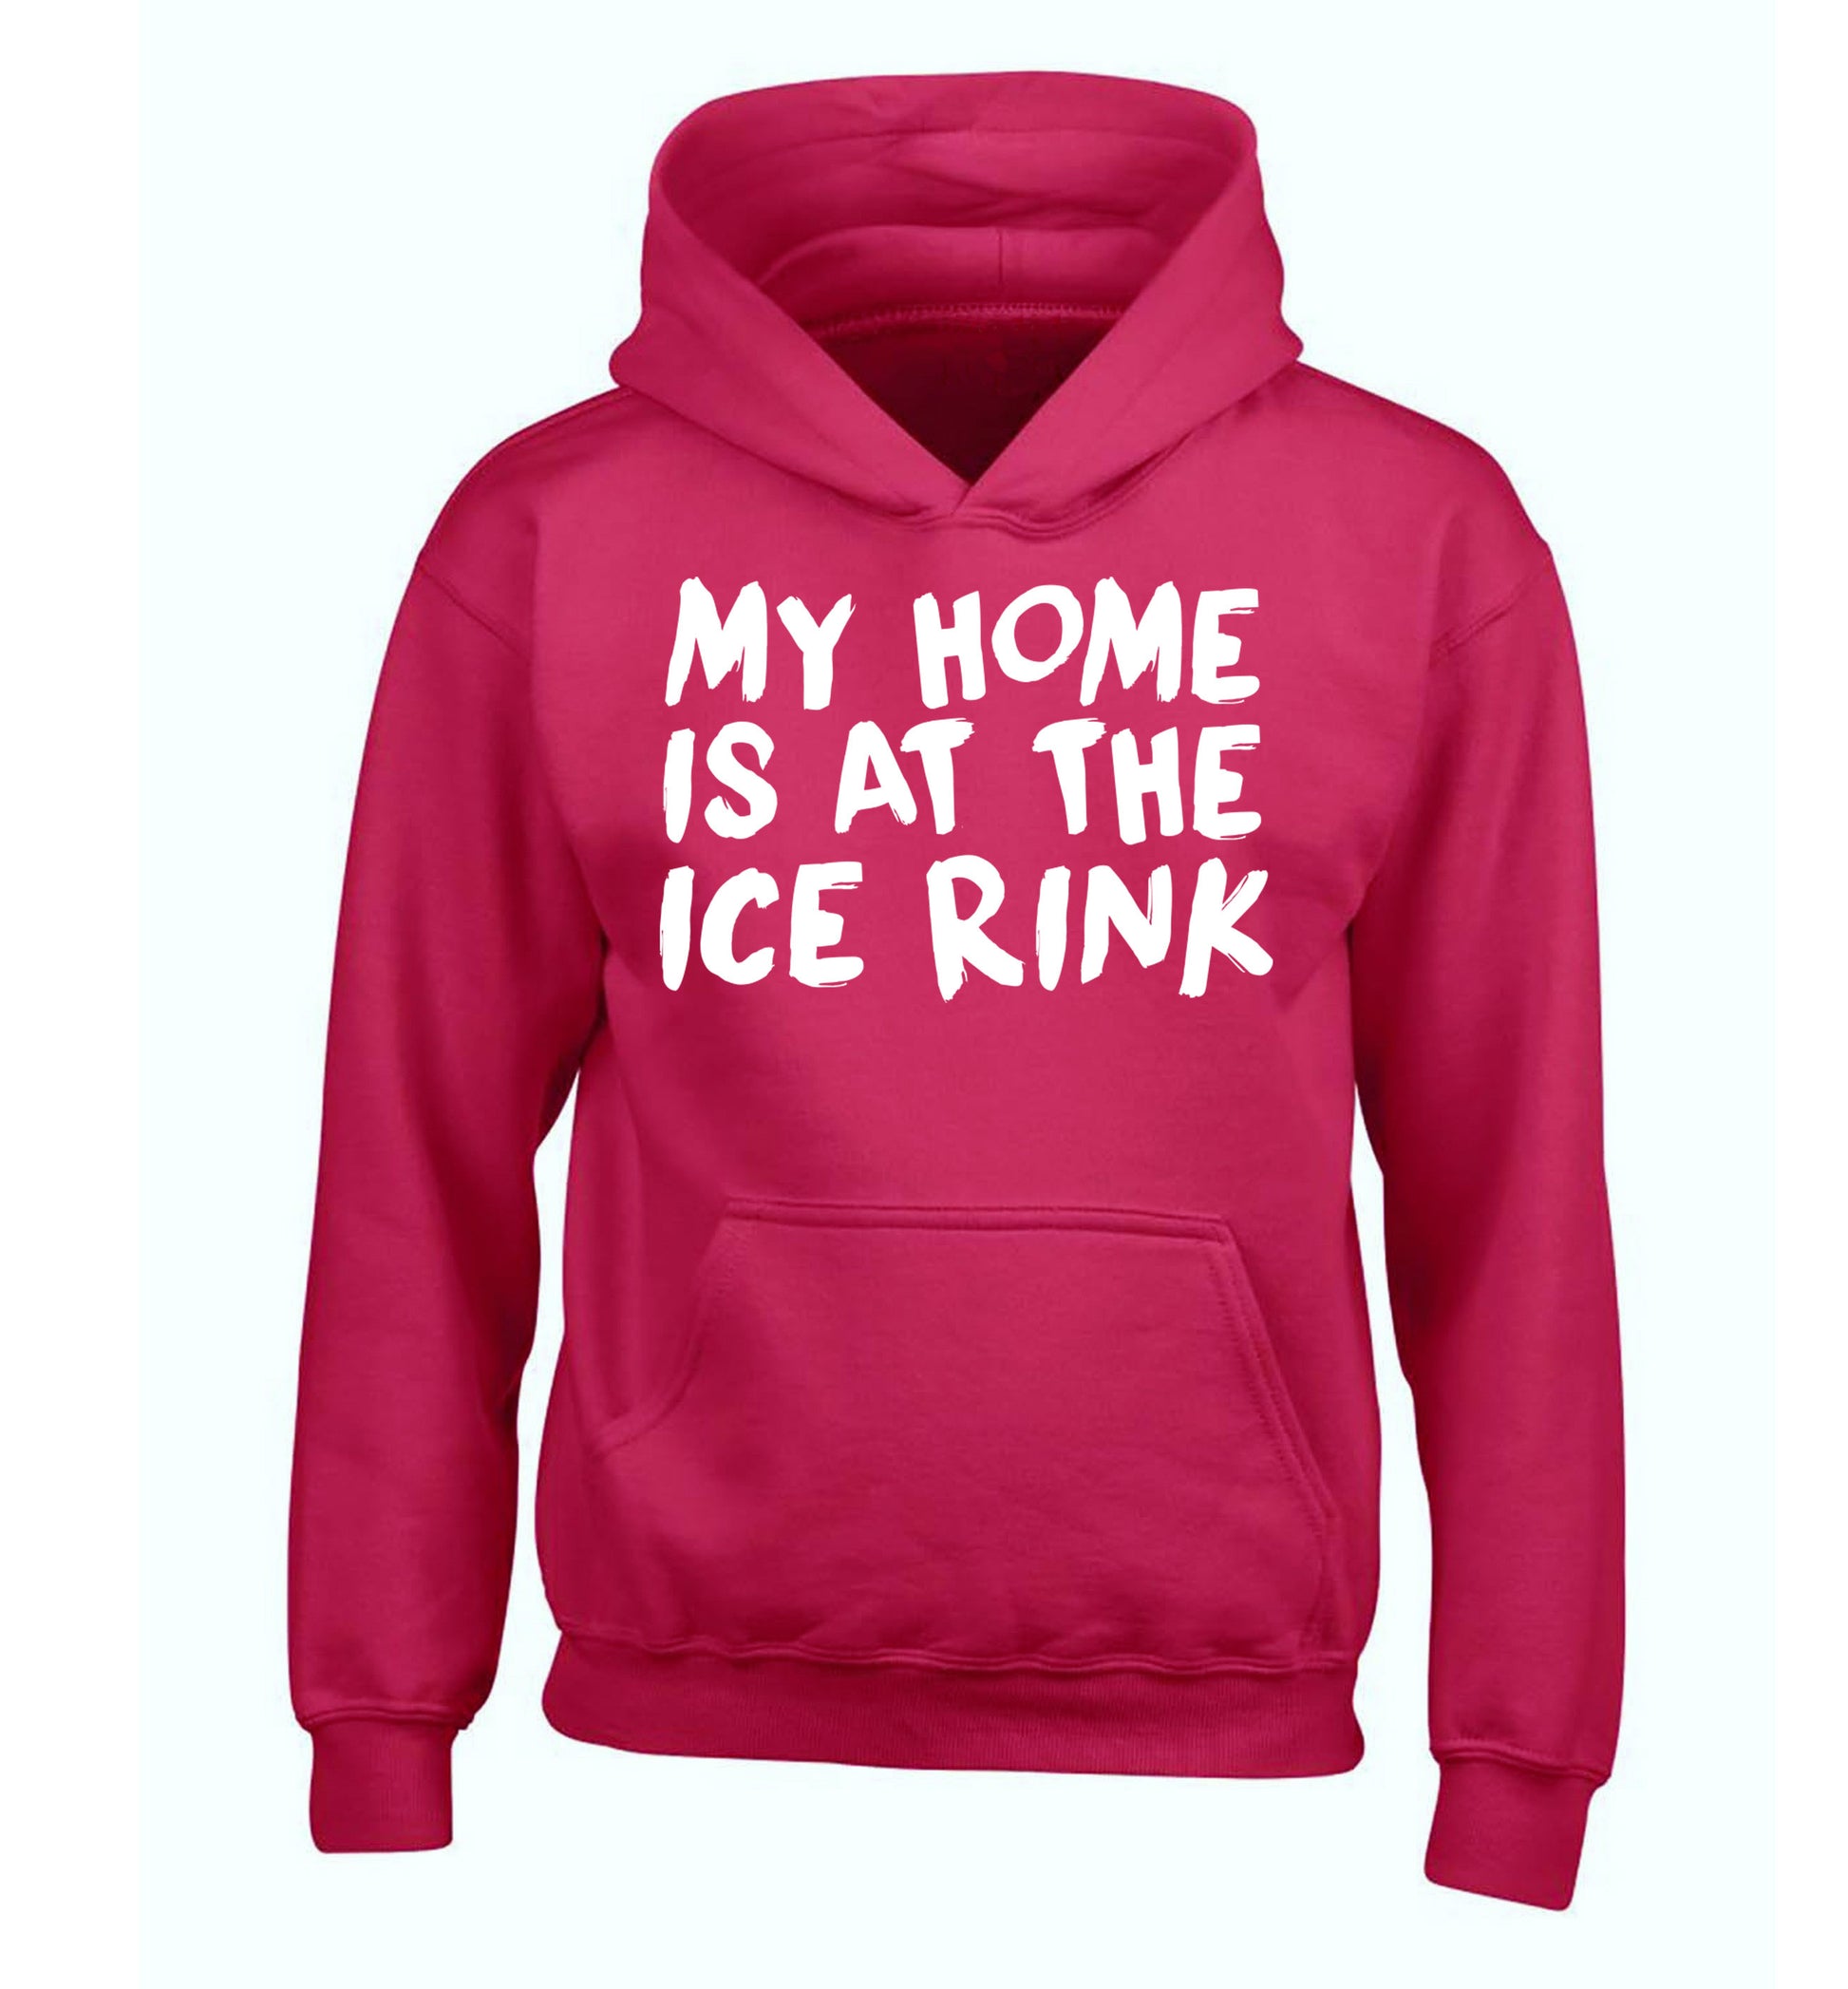 My home is at the ice rink children's pink hoodie 12-14 Years